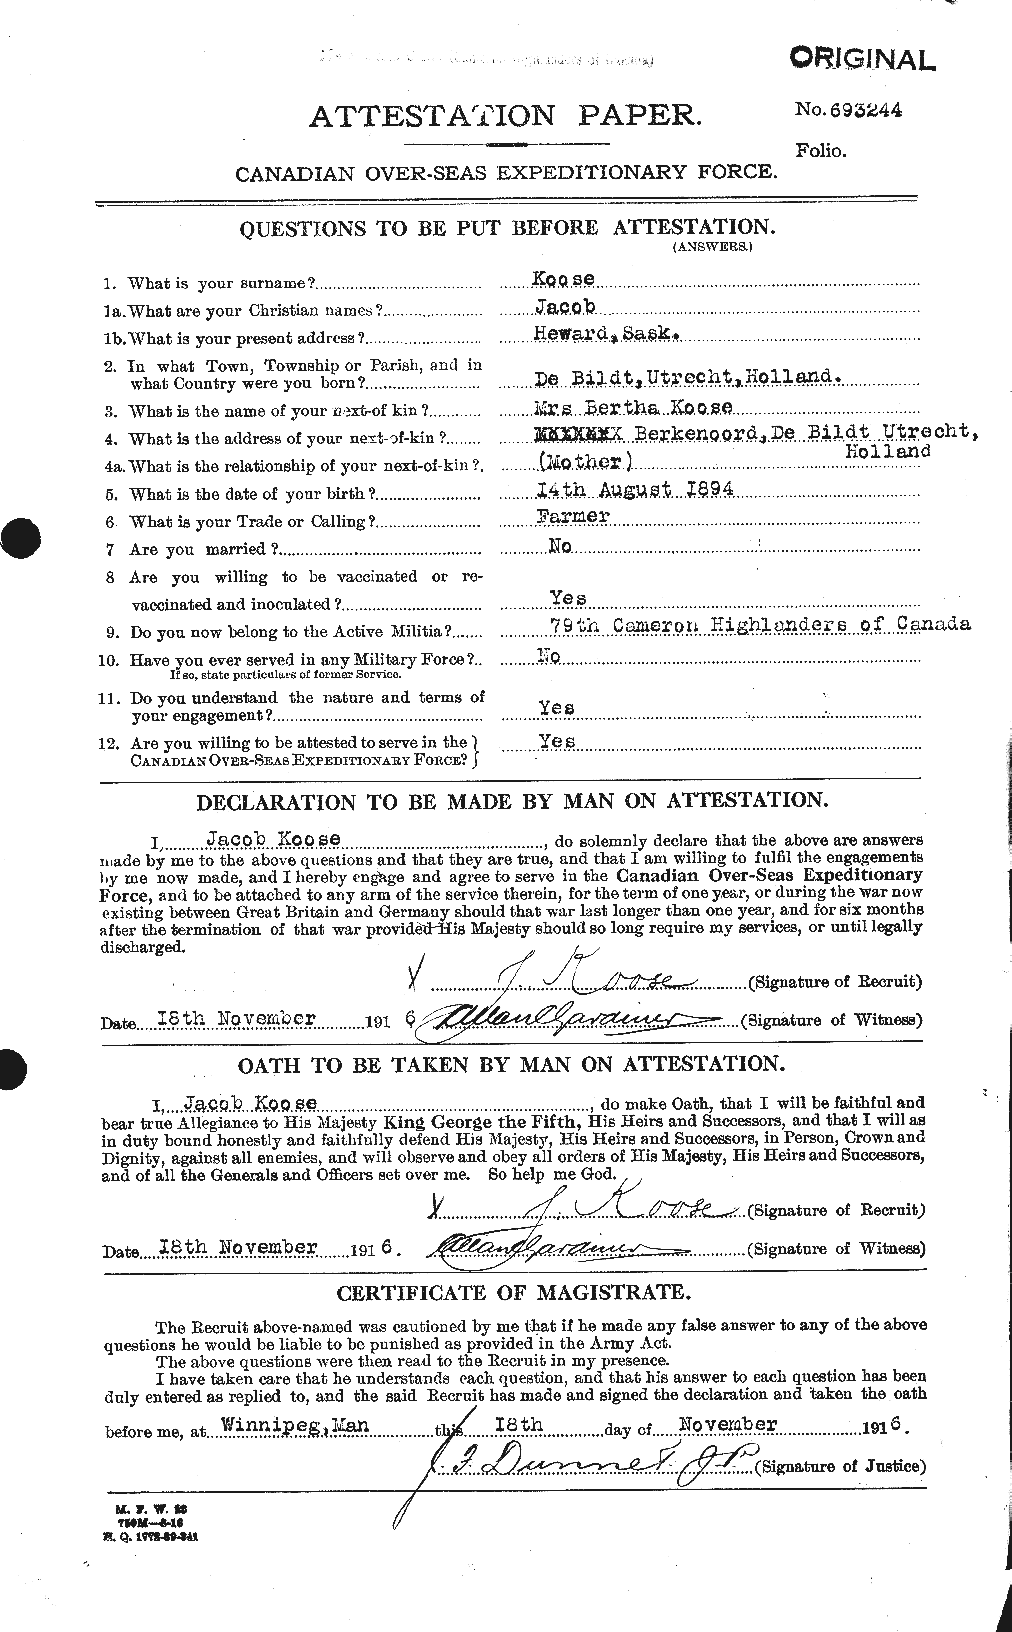 Personnel Records of the First World War - CEF 439982a